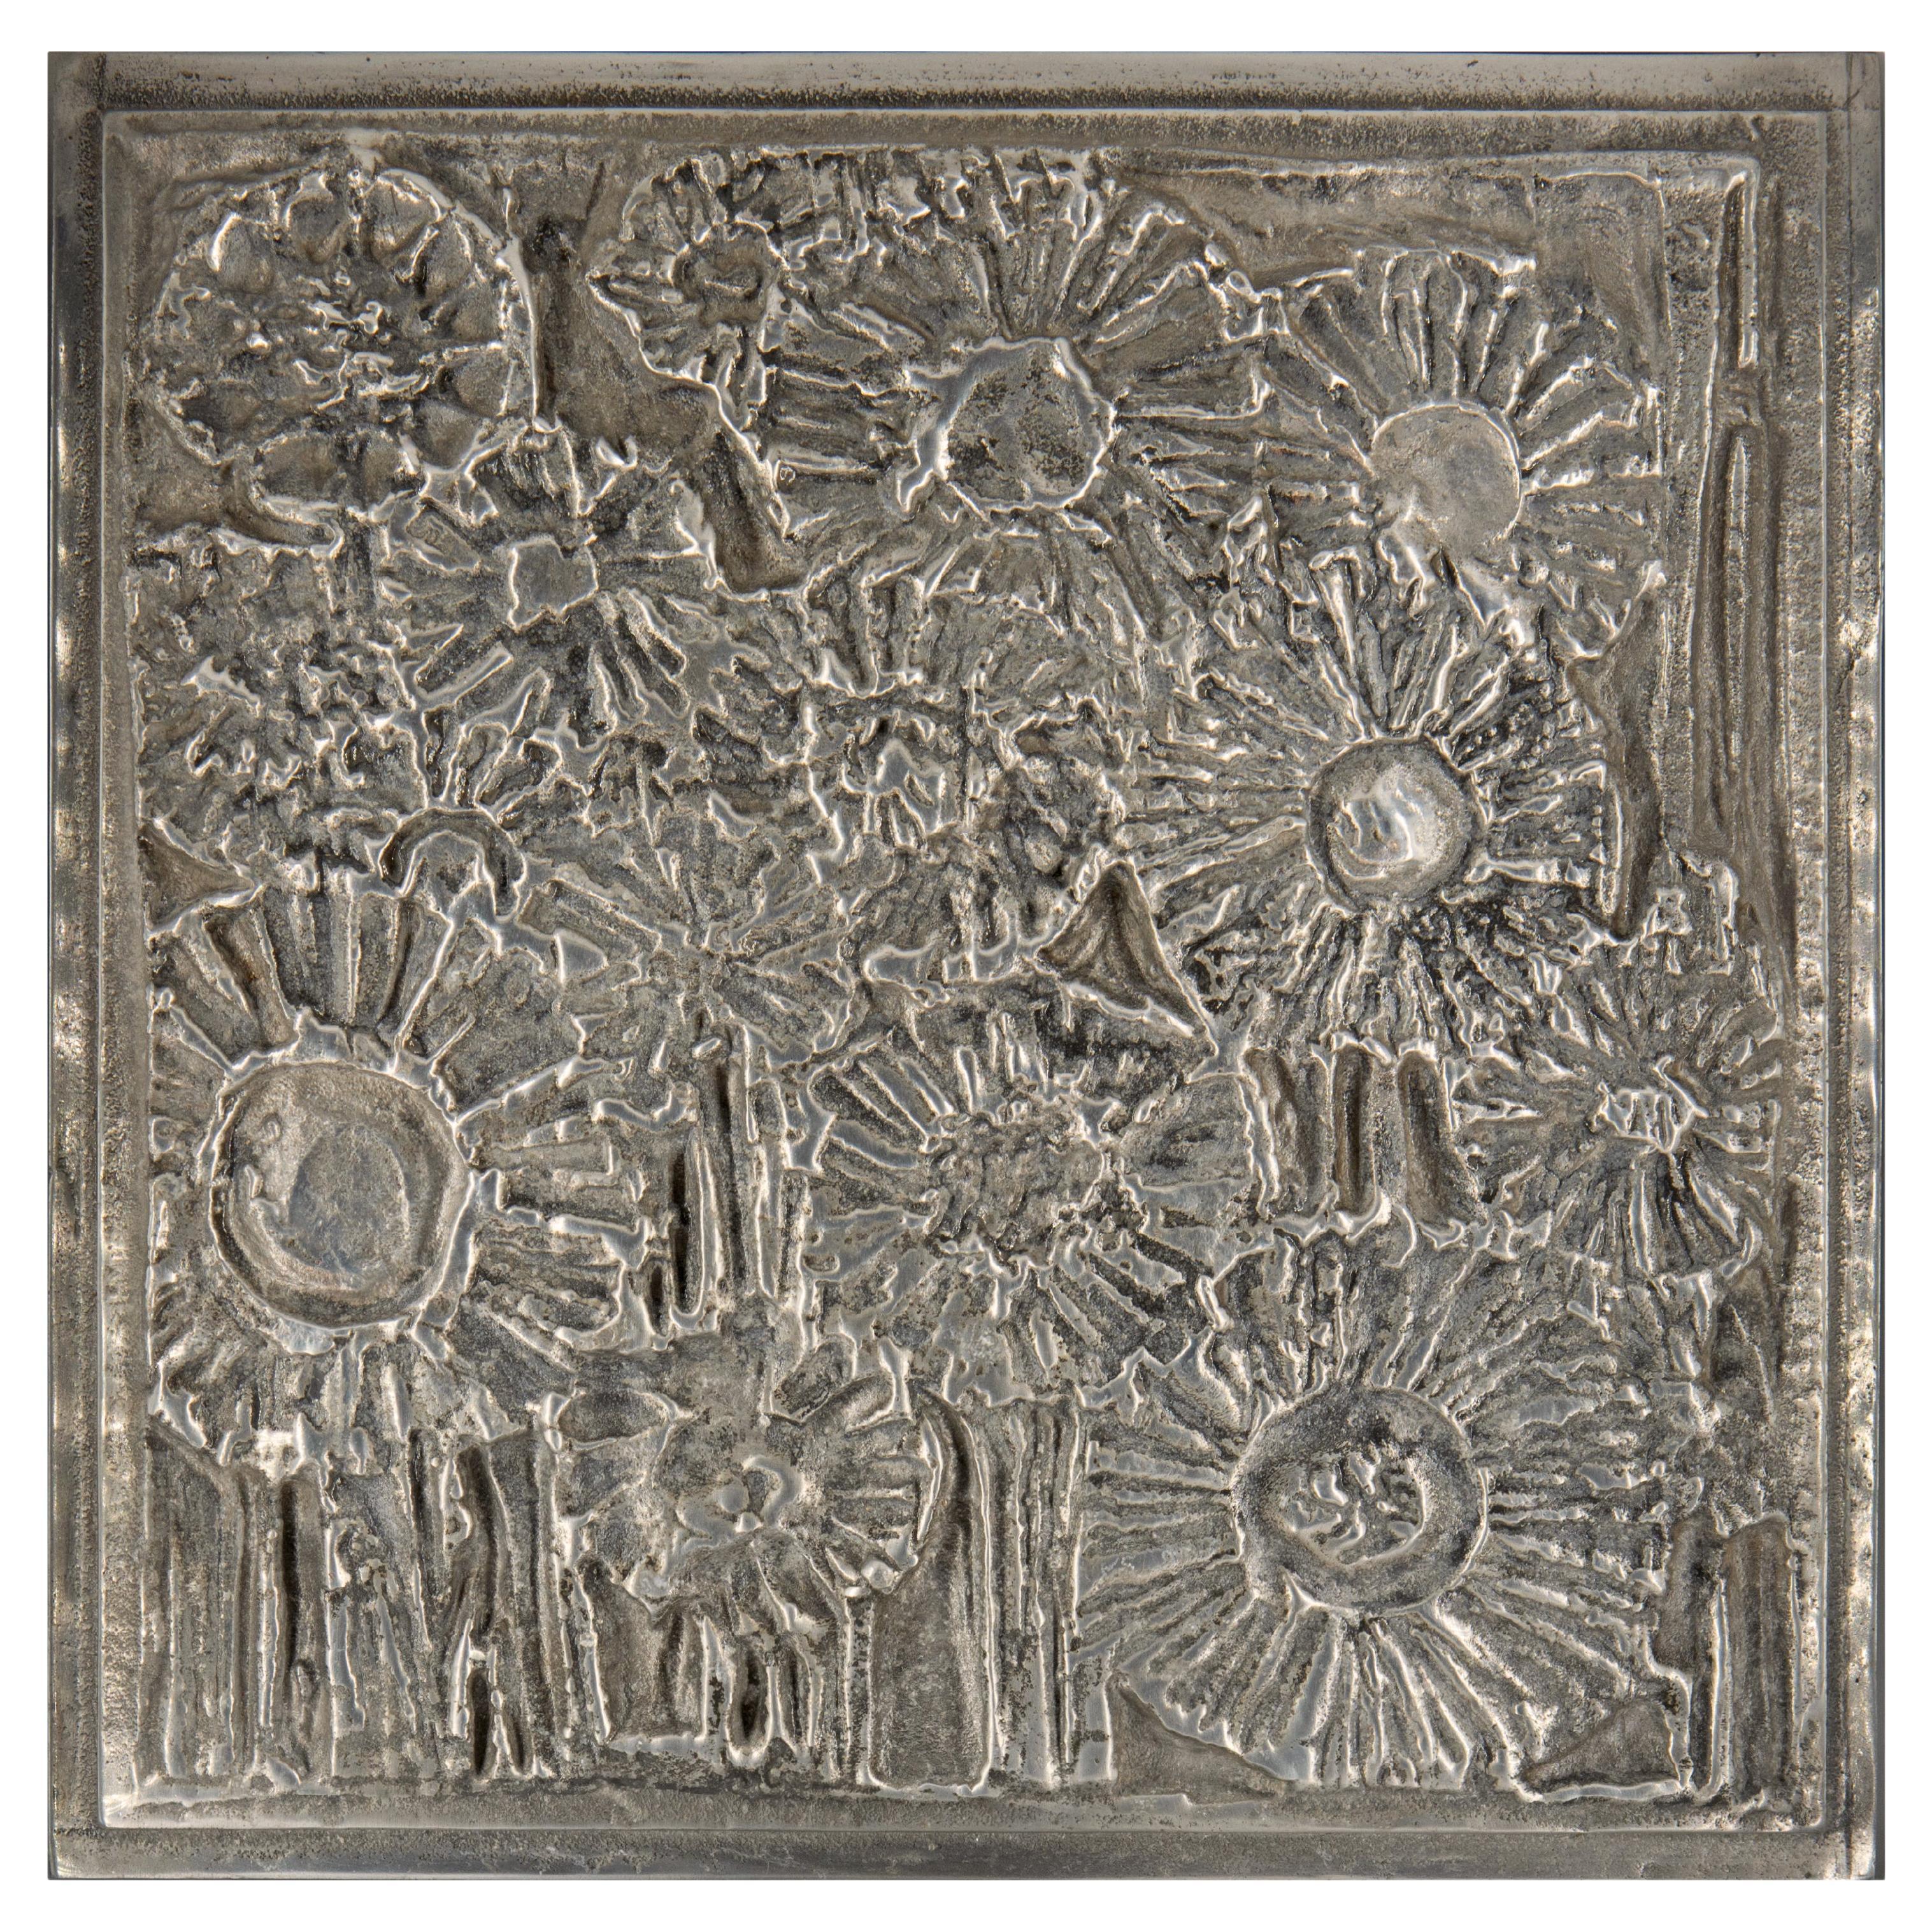 A fabulous set of ten abstract cast aluminium square plaques. Maker's label: Forms & Surfaces - United States - Circa 1970.

By repute, these were a feature of the foyer of a building in East Anglia, UK when it was built in the early 1970's. 

The